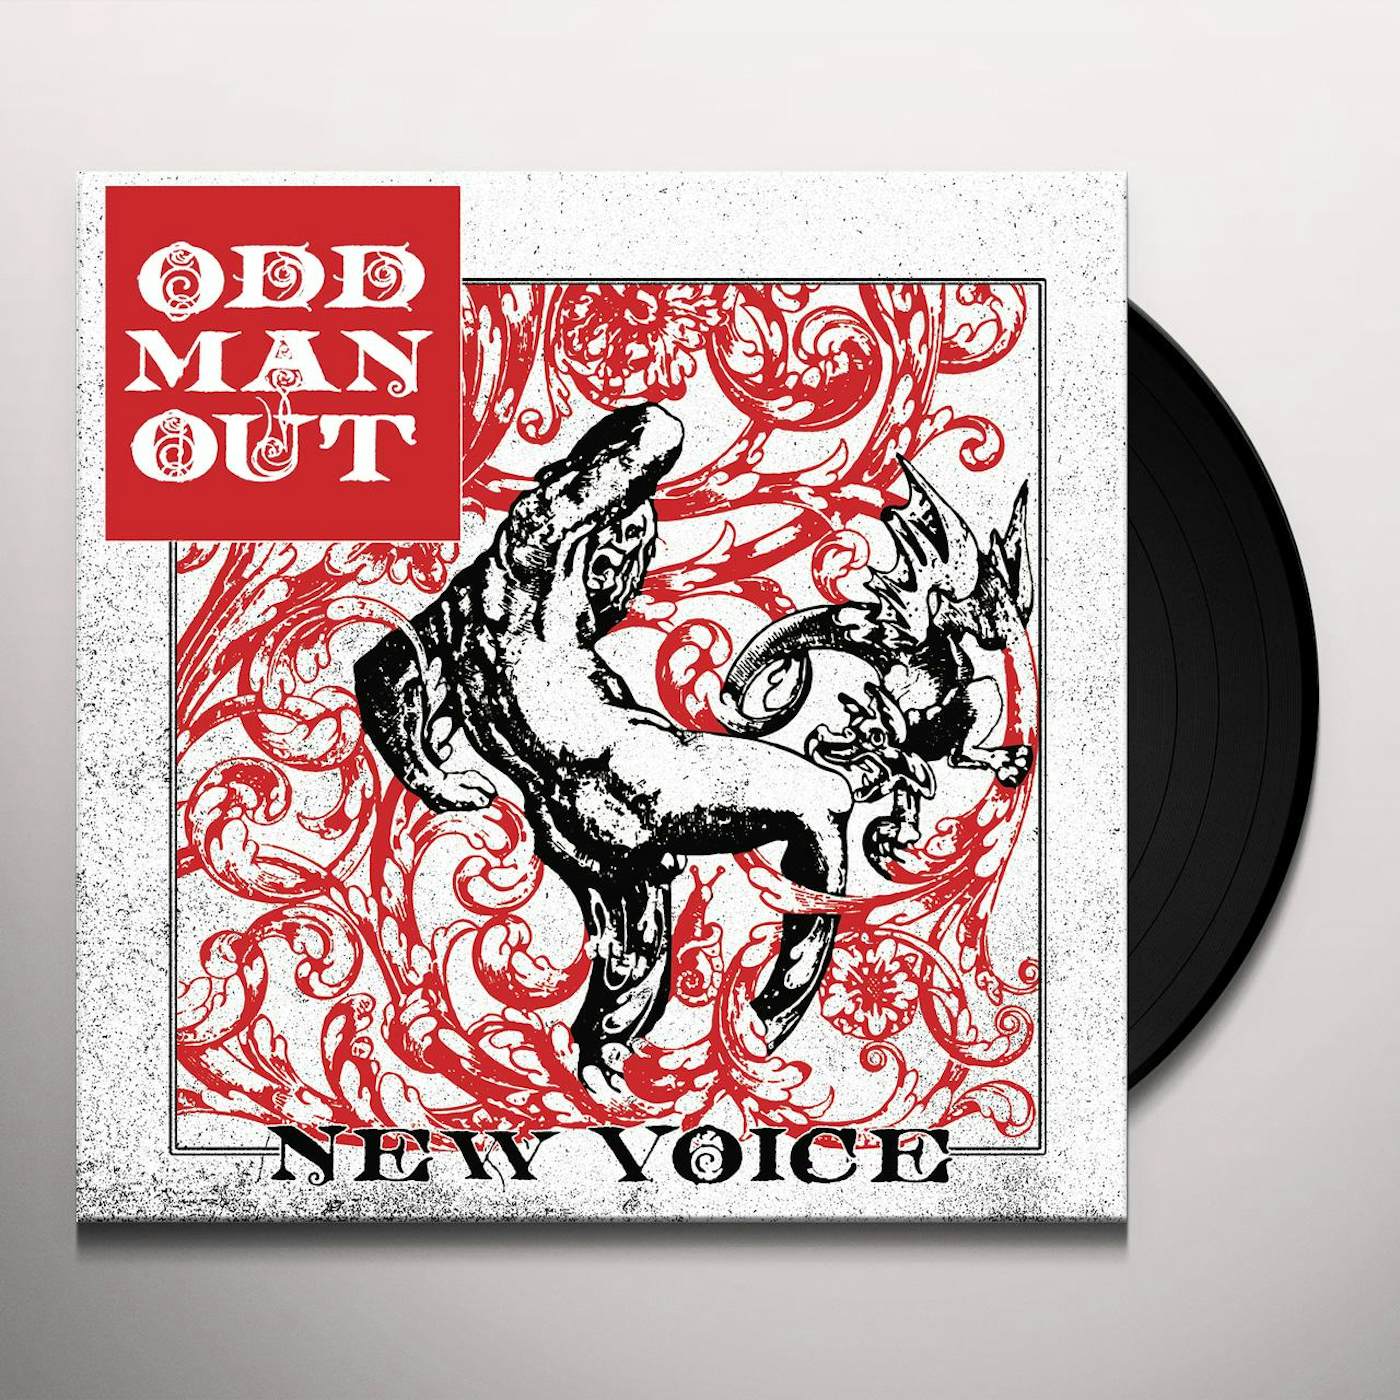 Odd Man Out New Voice Vinyl Record